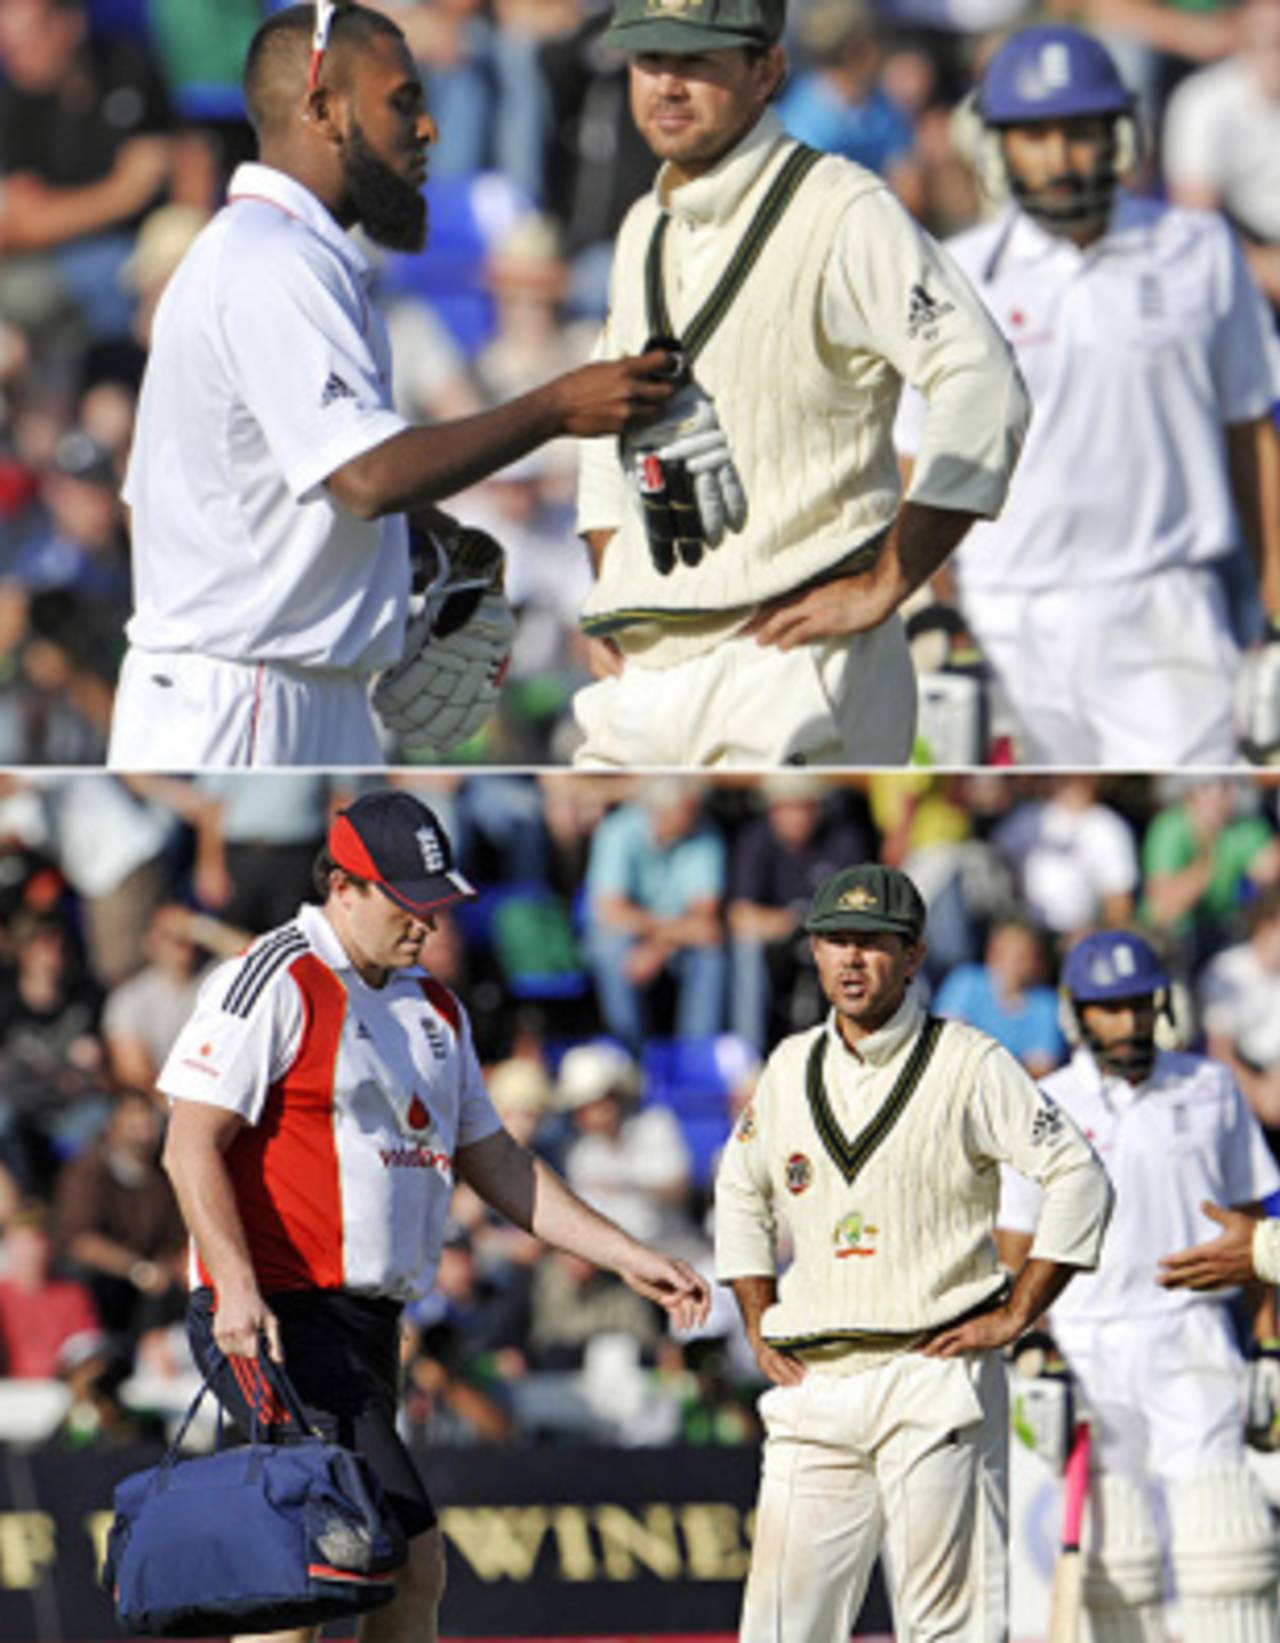 Ricky Ponting is not amused as England's 12th man, Bilal Shafayat and their physio interrupt play during the final moments of the first Test, England v Australia, 1st Test, Cardiff, 5th day, July 12, 2009